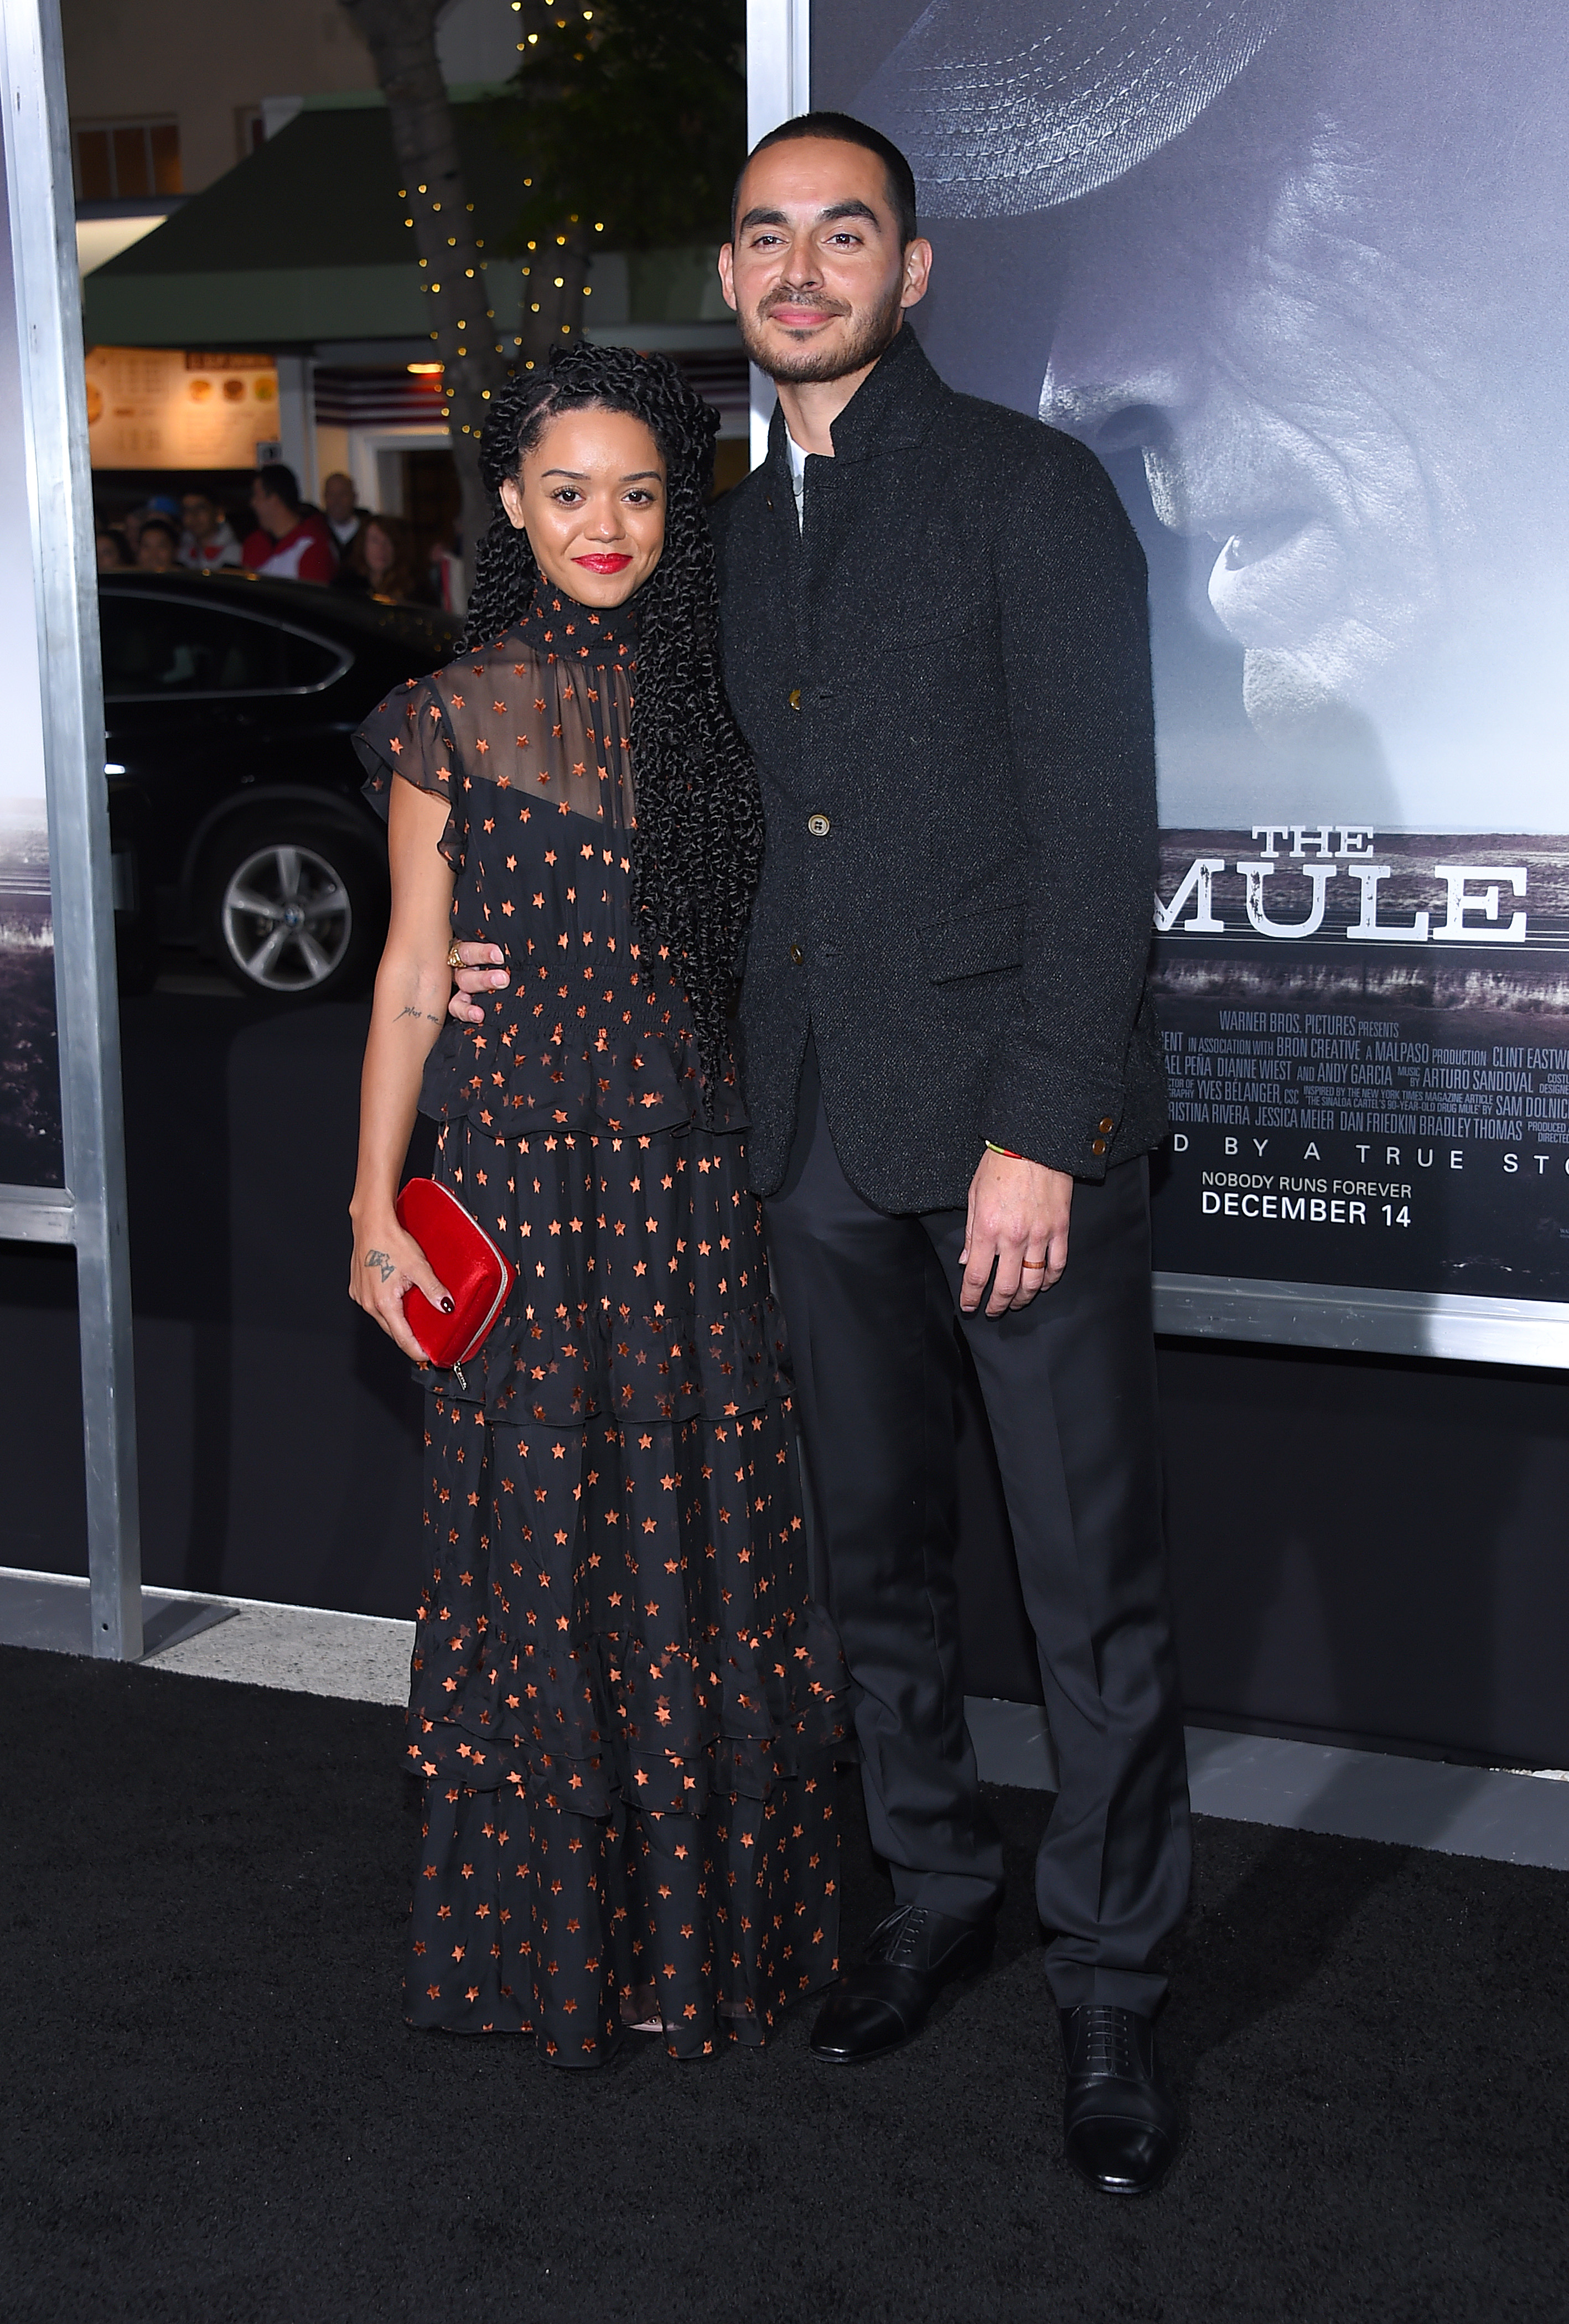 Manny Montana and Adelfa Marr at the premiere of "The Mule" on December 10, 2018, in Westwood, California. | Source: Getty Images